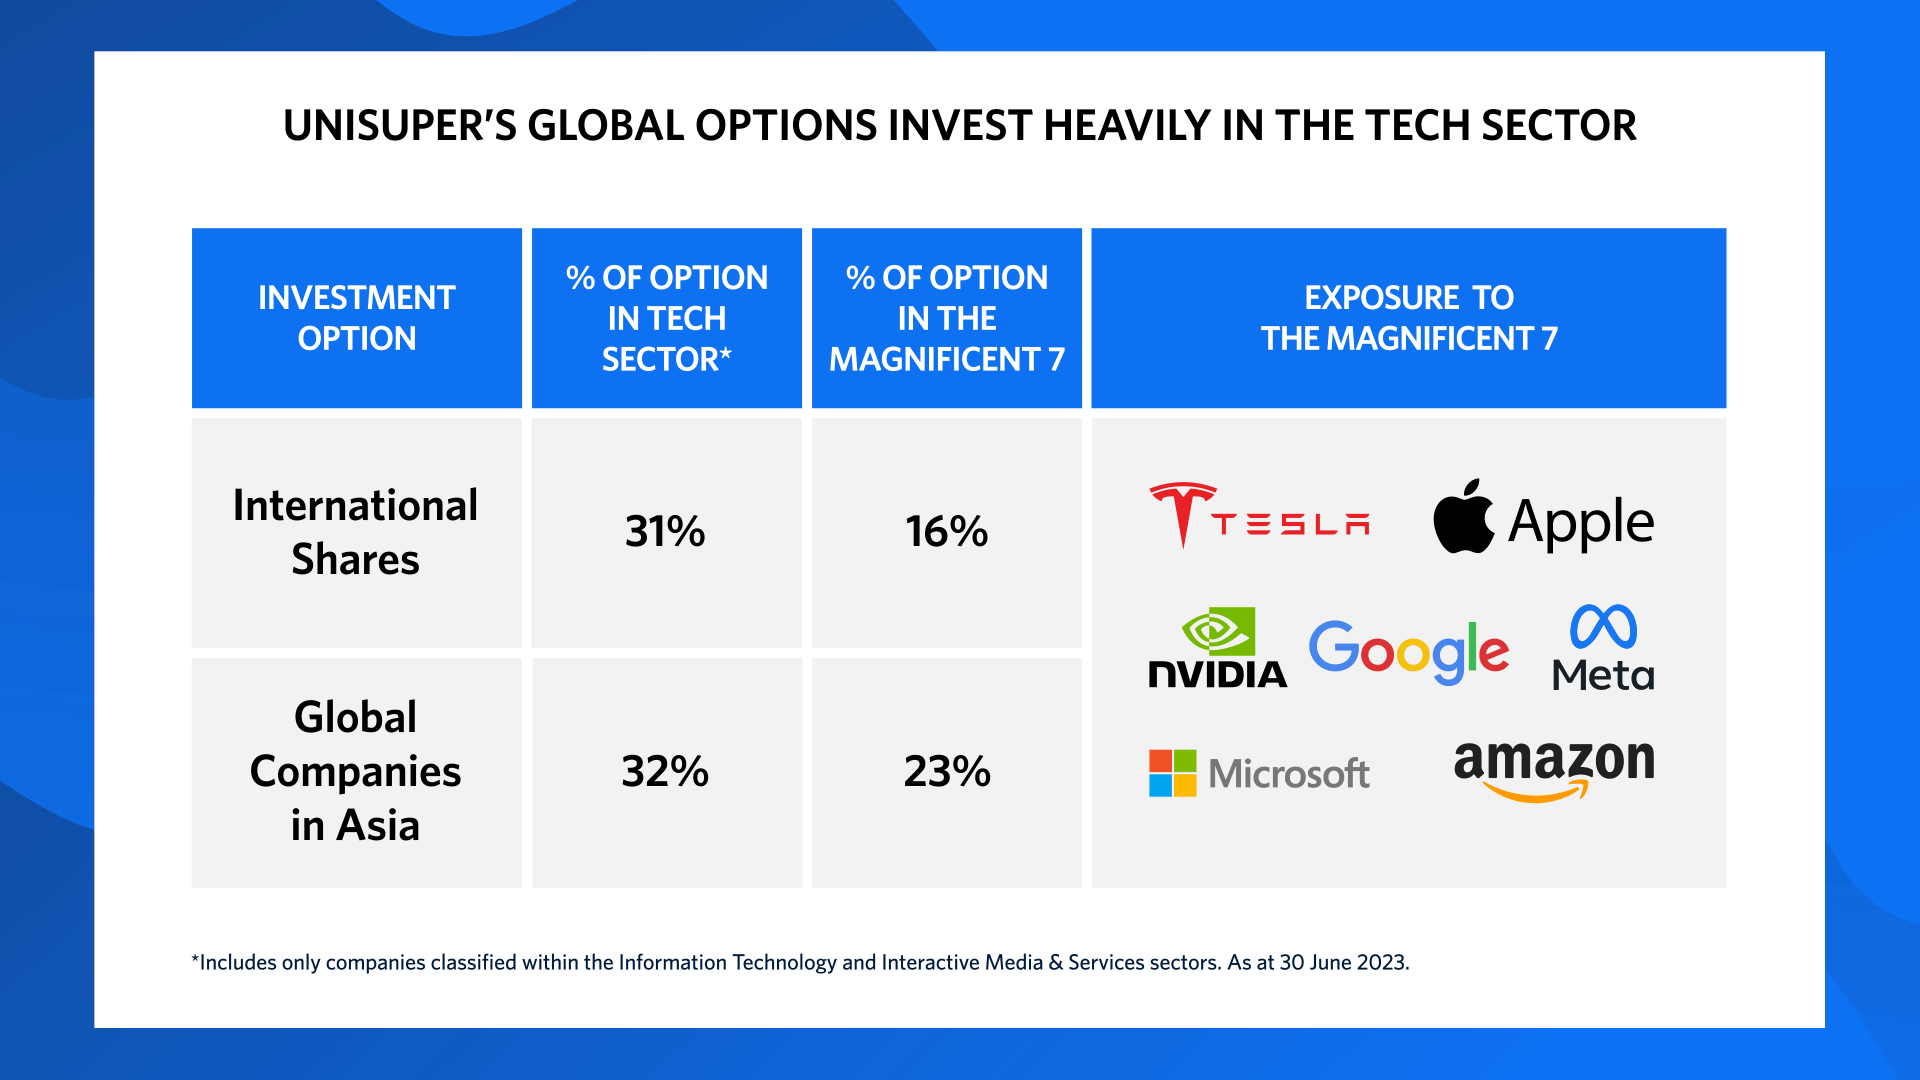 Chart 1: Chart showing the companies comprising the 'Magnificent Seven' (Tesla, Amazon, Apple, Google, Meta, Nvidia, Microsoft) and how much of UniSuper's International Shares and Global Companies in Asia investment options are invested in them. Percentage of option invested in the tech sector: International Shares (31%), Global Companies in Asia (32%). Percentage of option invested in the 'Magnificent Seven': International Shares (16%), Global Companies in Asia (23%).